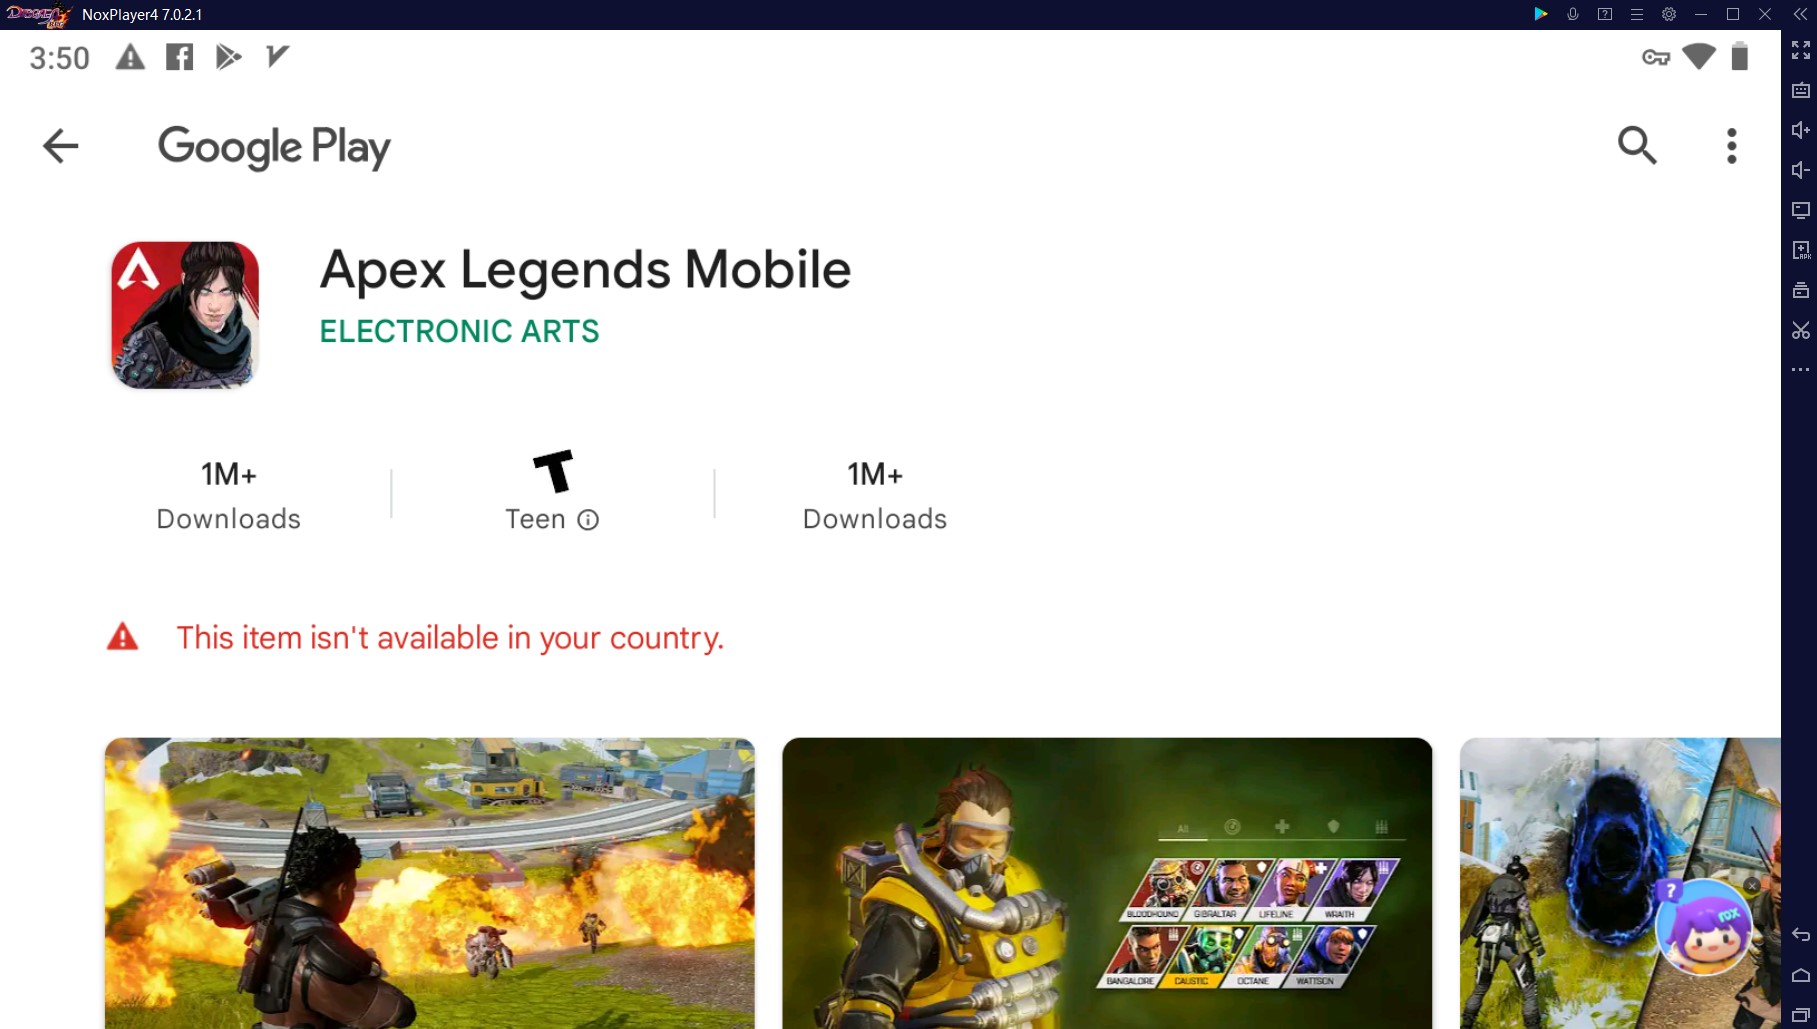 HOW TO DOWNLOAD APEX LEGENDS MOBILE ON IOS (IPHONE,IPAD)